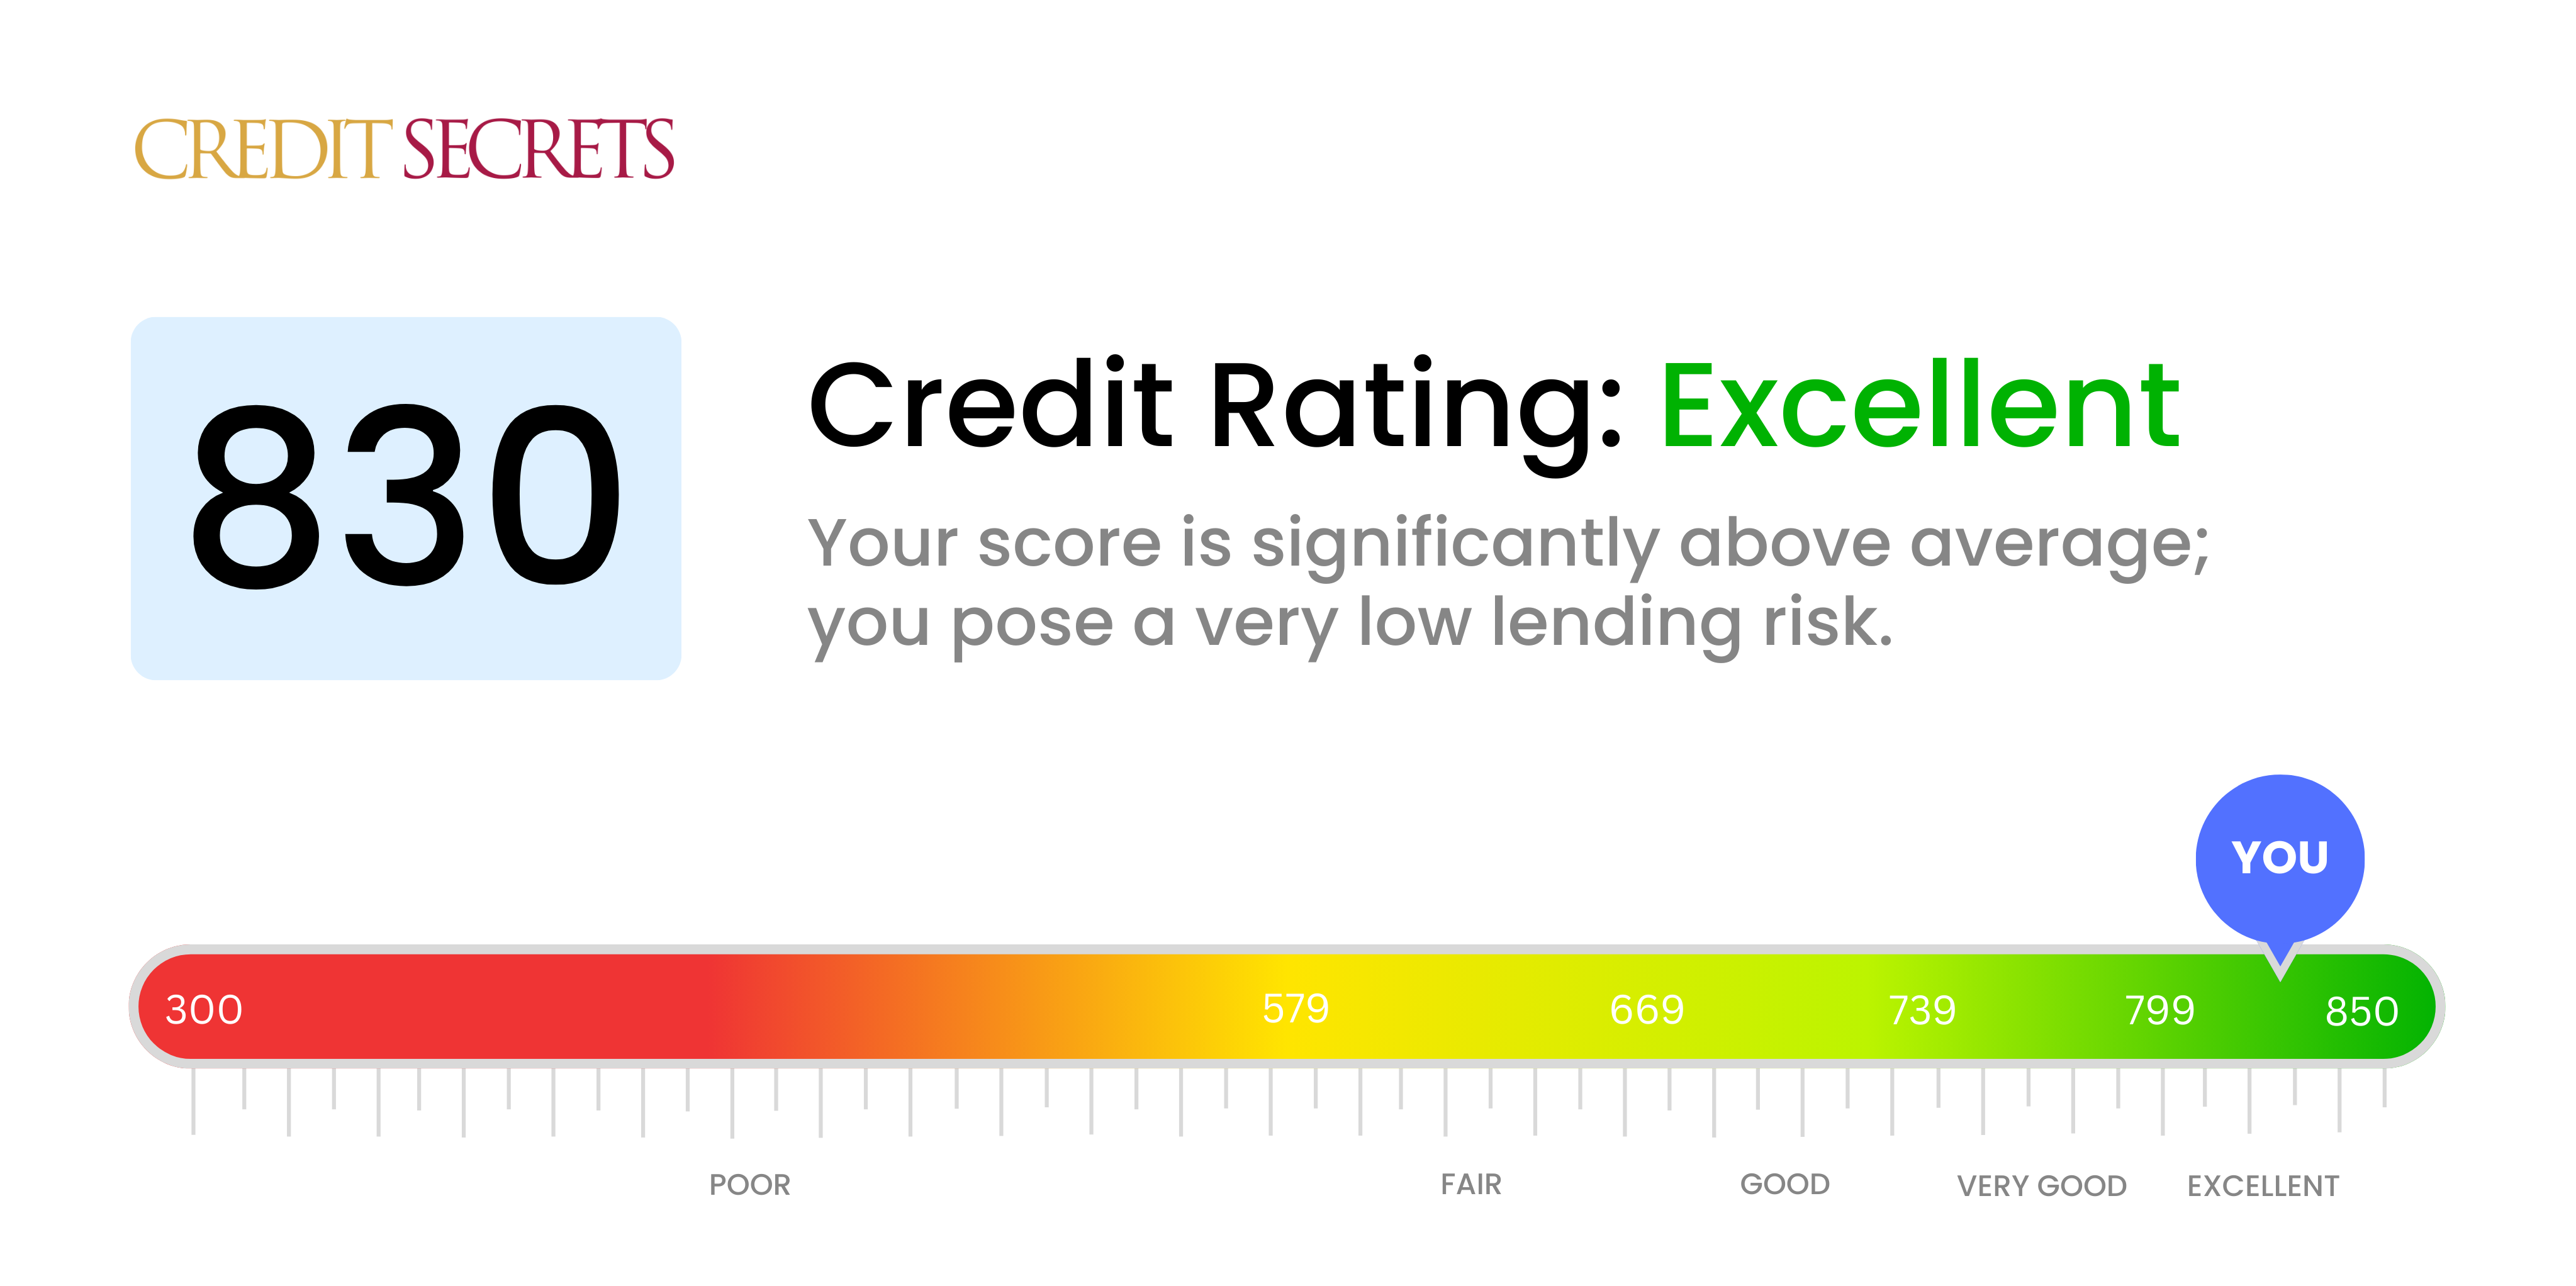 Is 830 a good credit score?